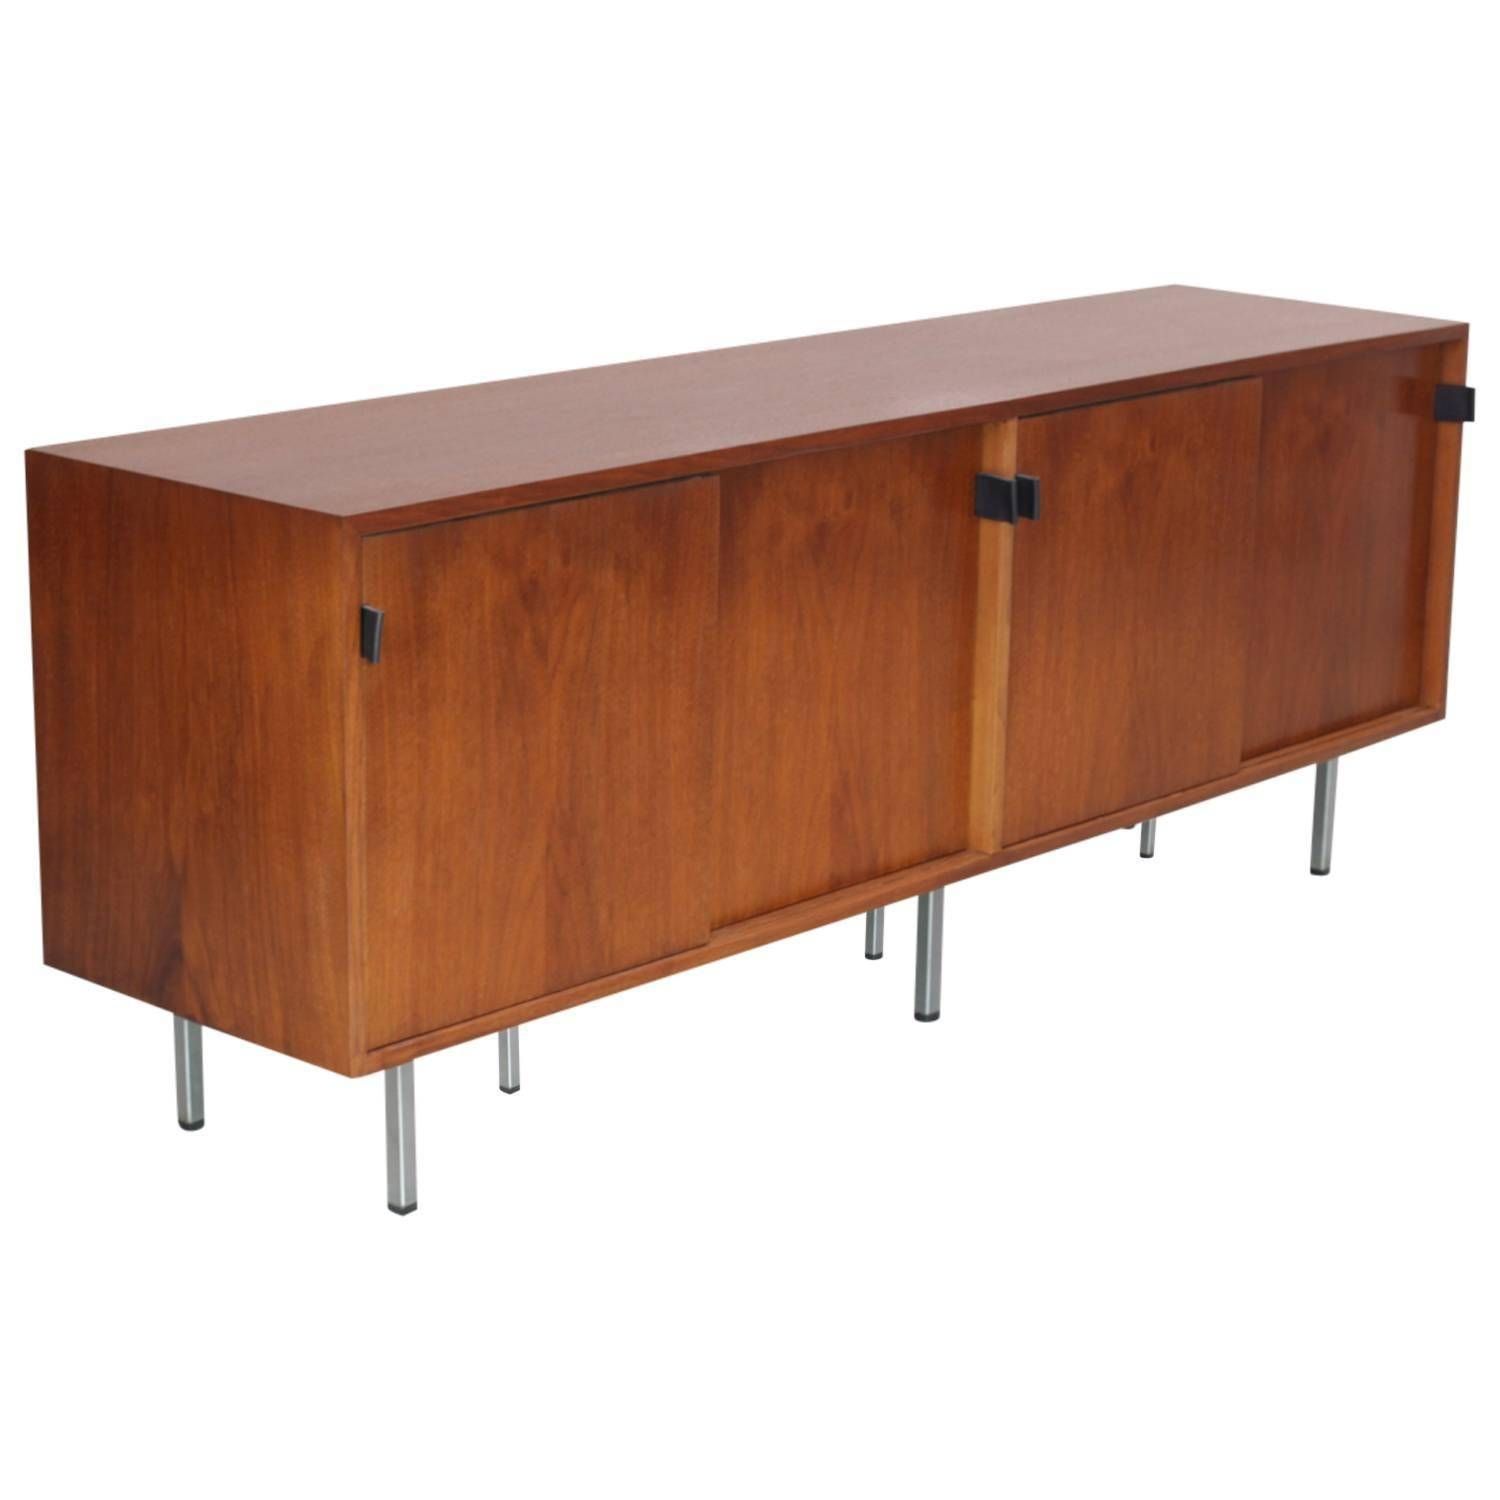 Florence Knoll Credenza Sideboard Walnut With Leather Pulls For In 2017 Florence Knoll Sideboards (View 13 of 15)